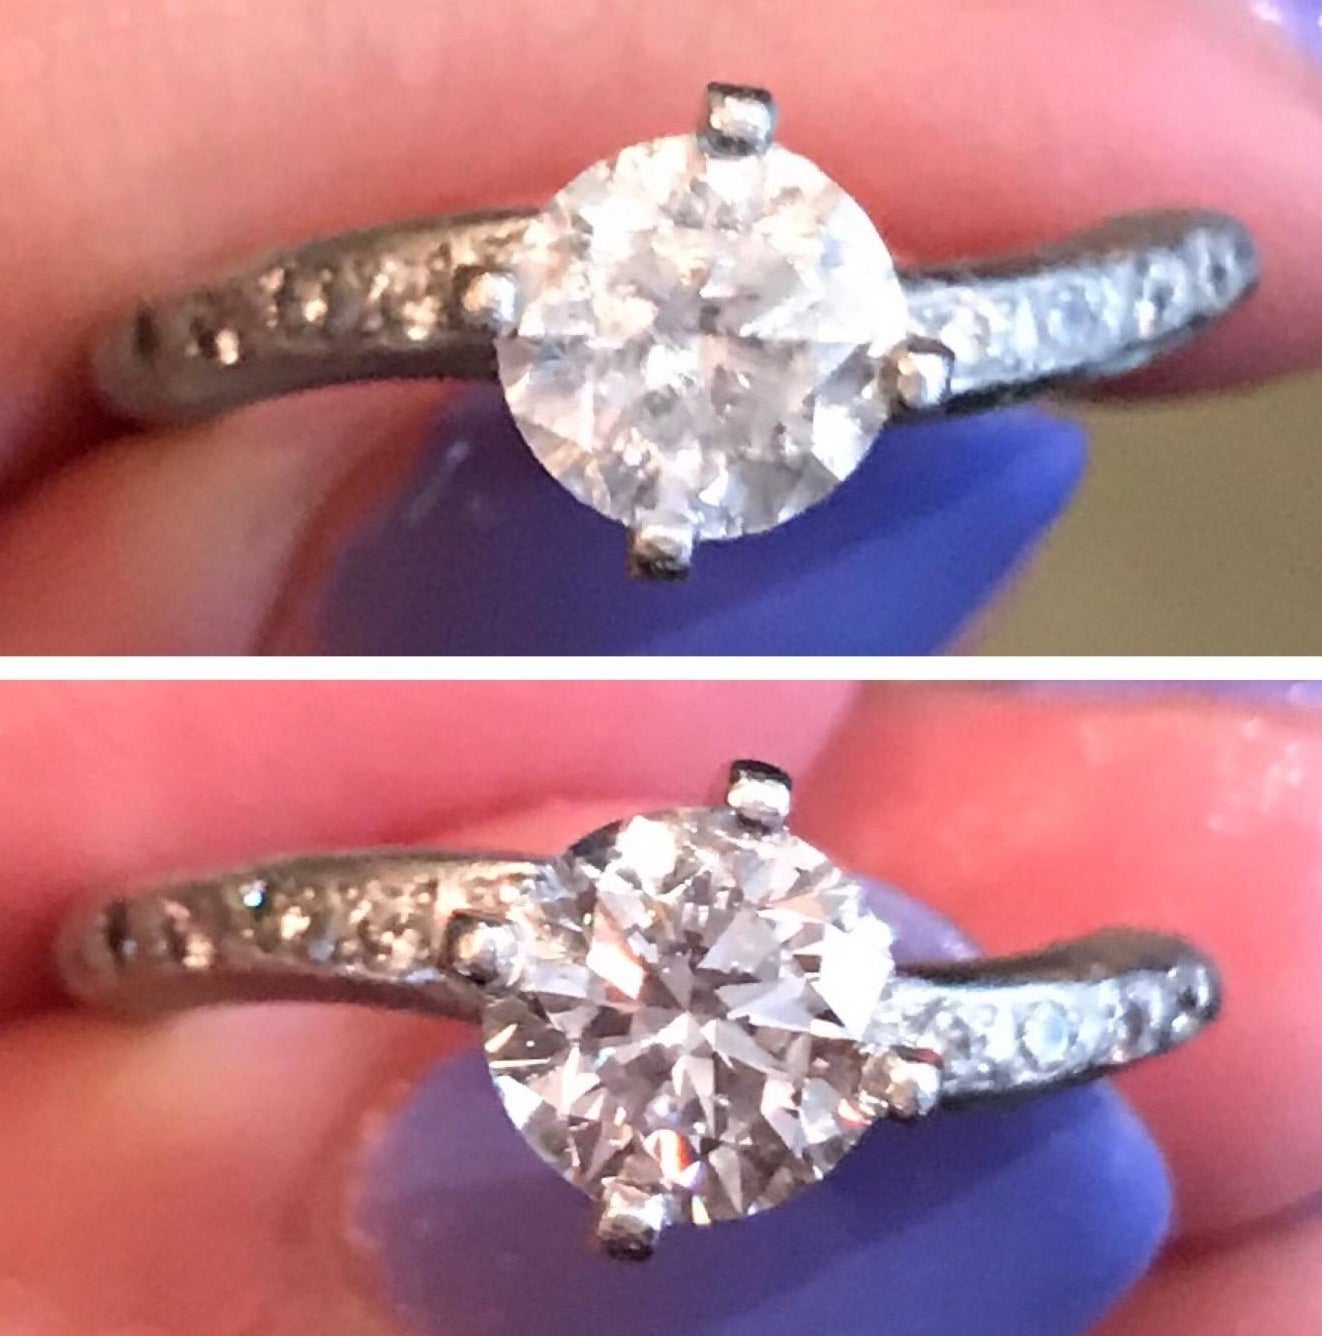 Reviewer&#x27;s photo of a cloudy diamond ring next to an after photo of a much more clear, defined, and shiny ring 